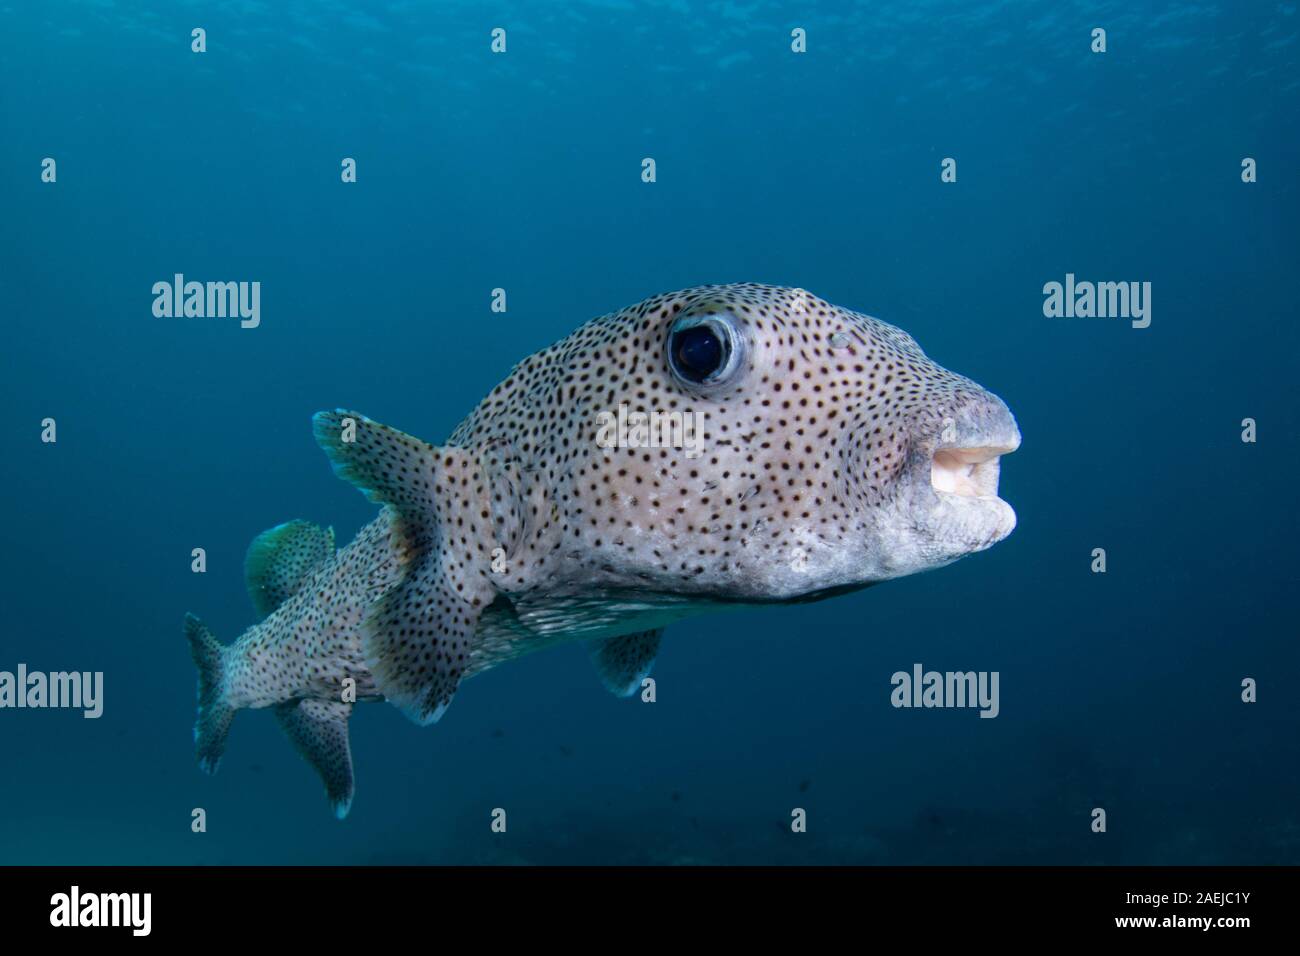 A Spot Fin Porcupine fish - Diodon hystrix - swims over the reef in blue waters. Taken in Komodo National Park, Indonesia Stock Photo